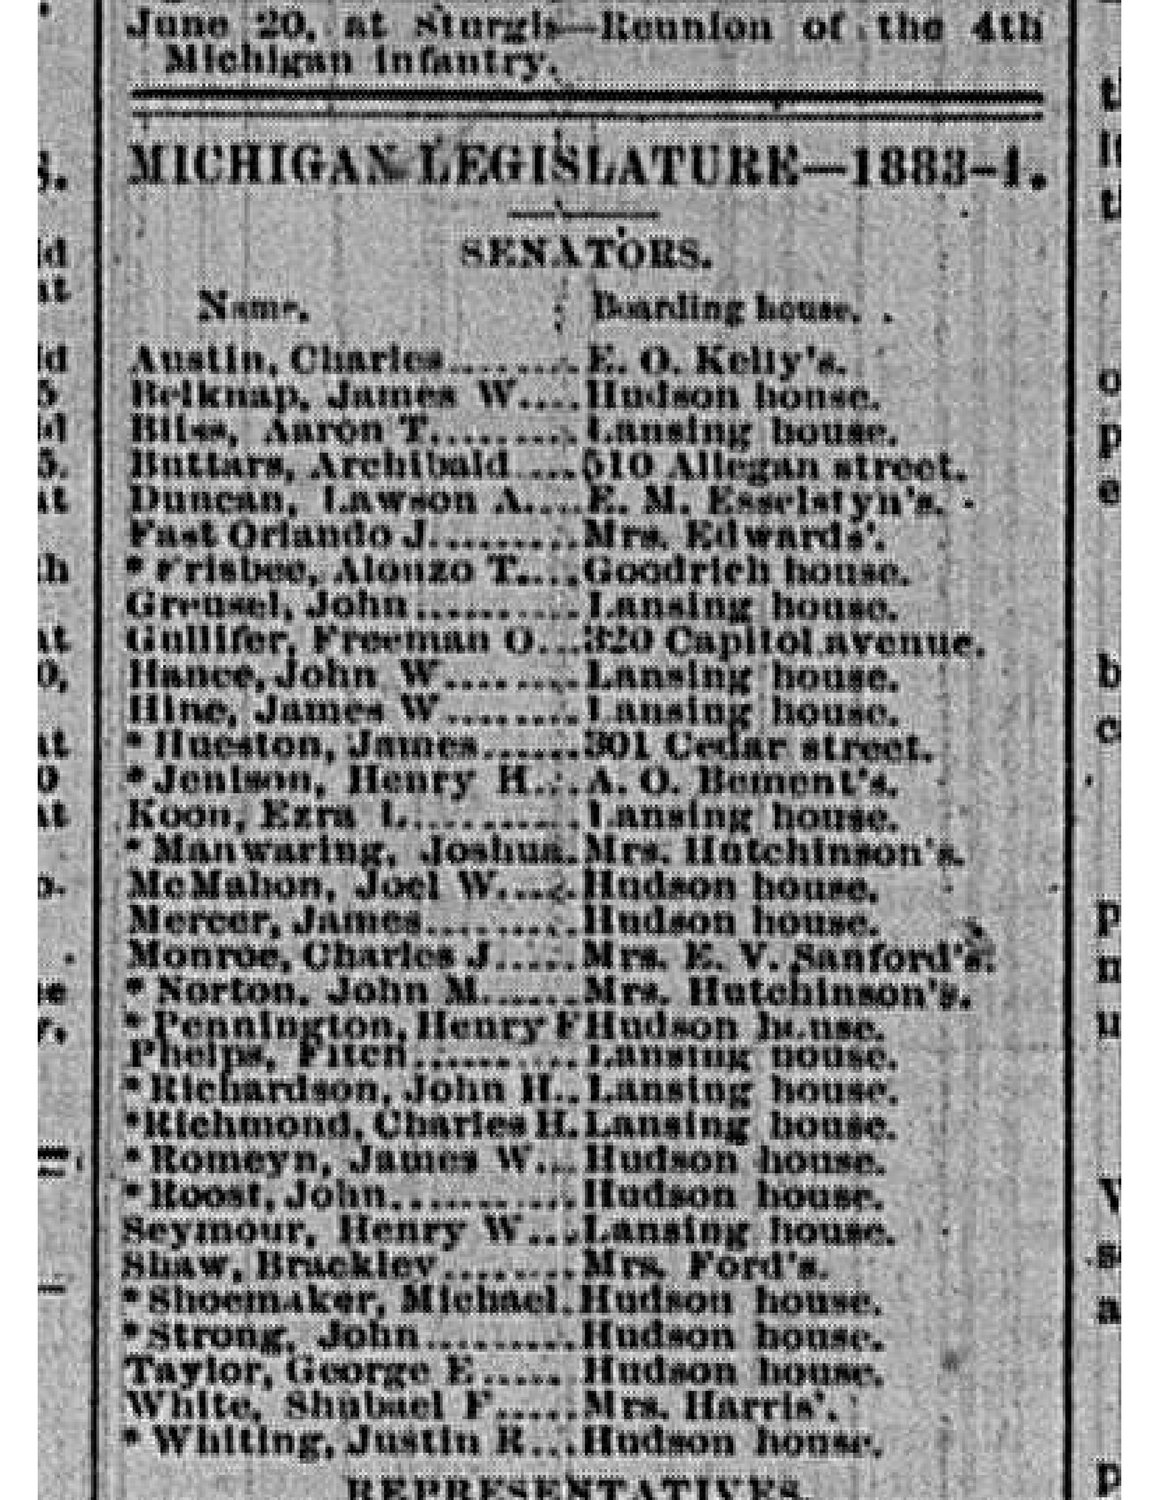 A list from The Lansing Tri-Weekly Republican newspaper from March 1, 1883, showing the boarding houses where Michigan legislators lived.